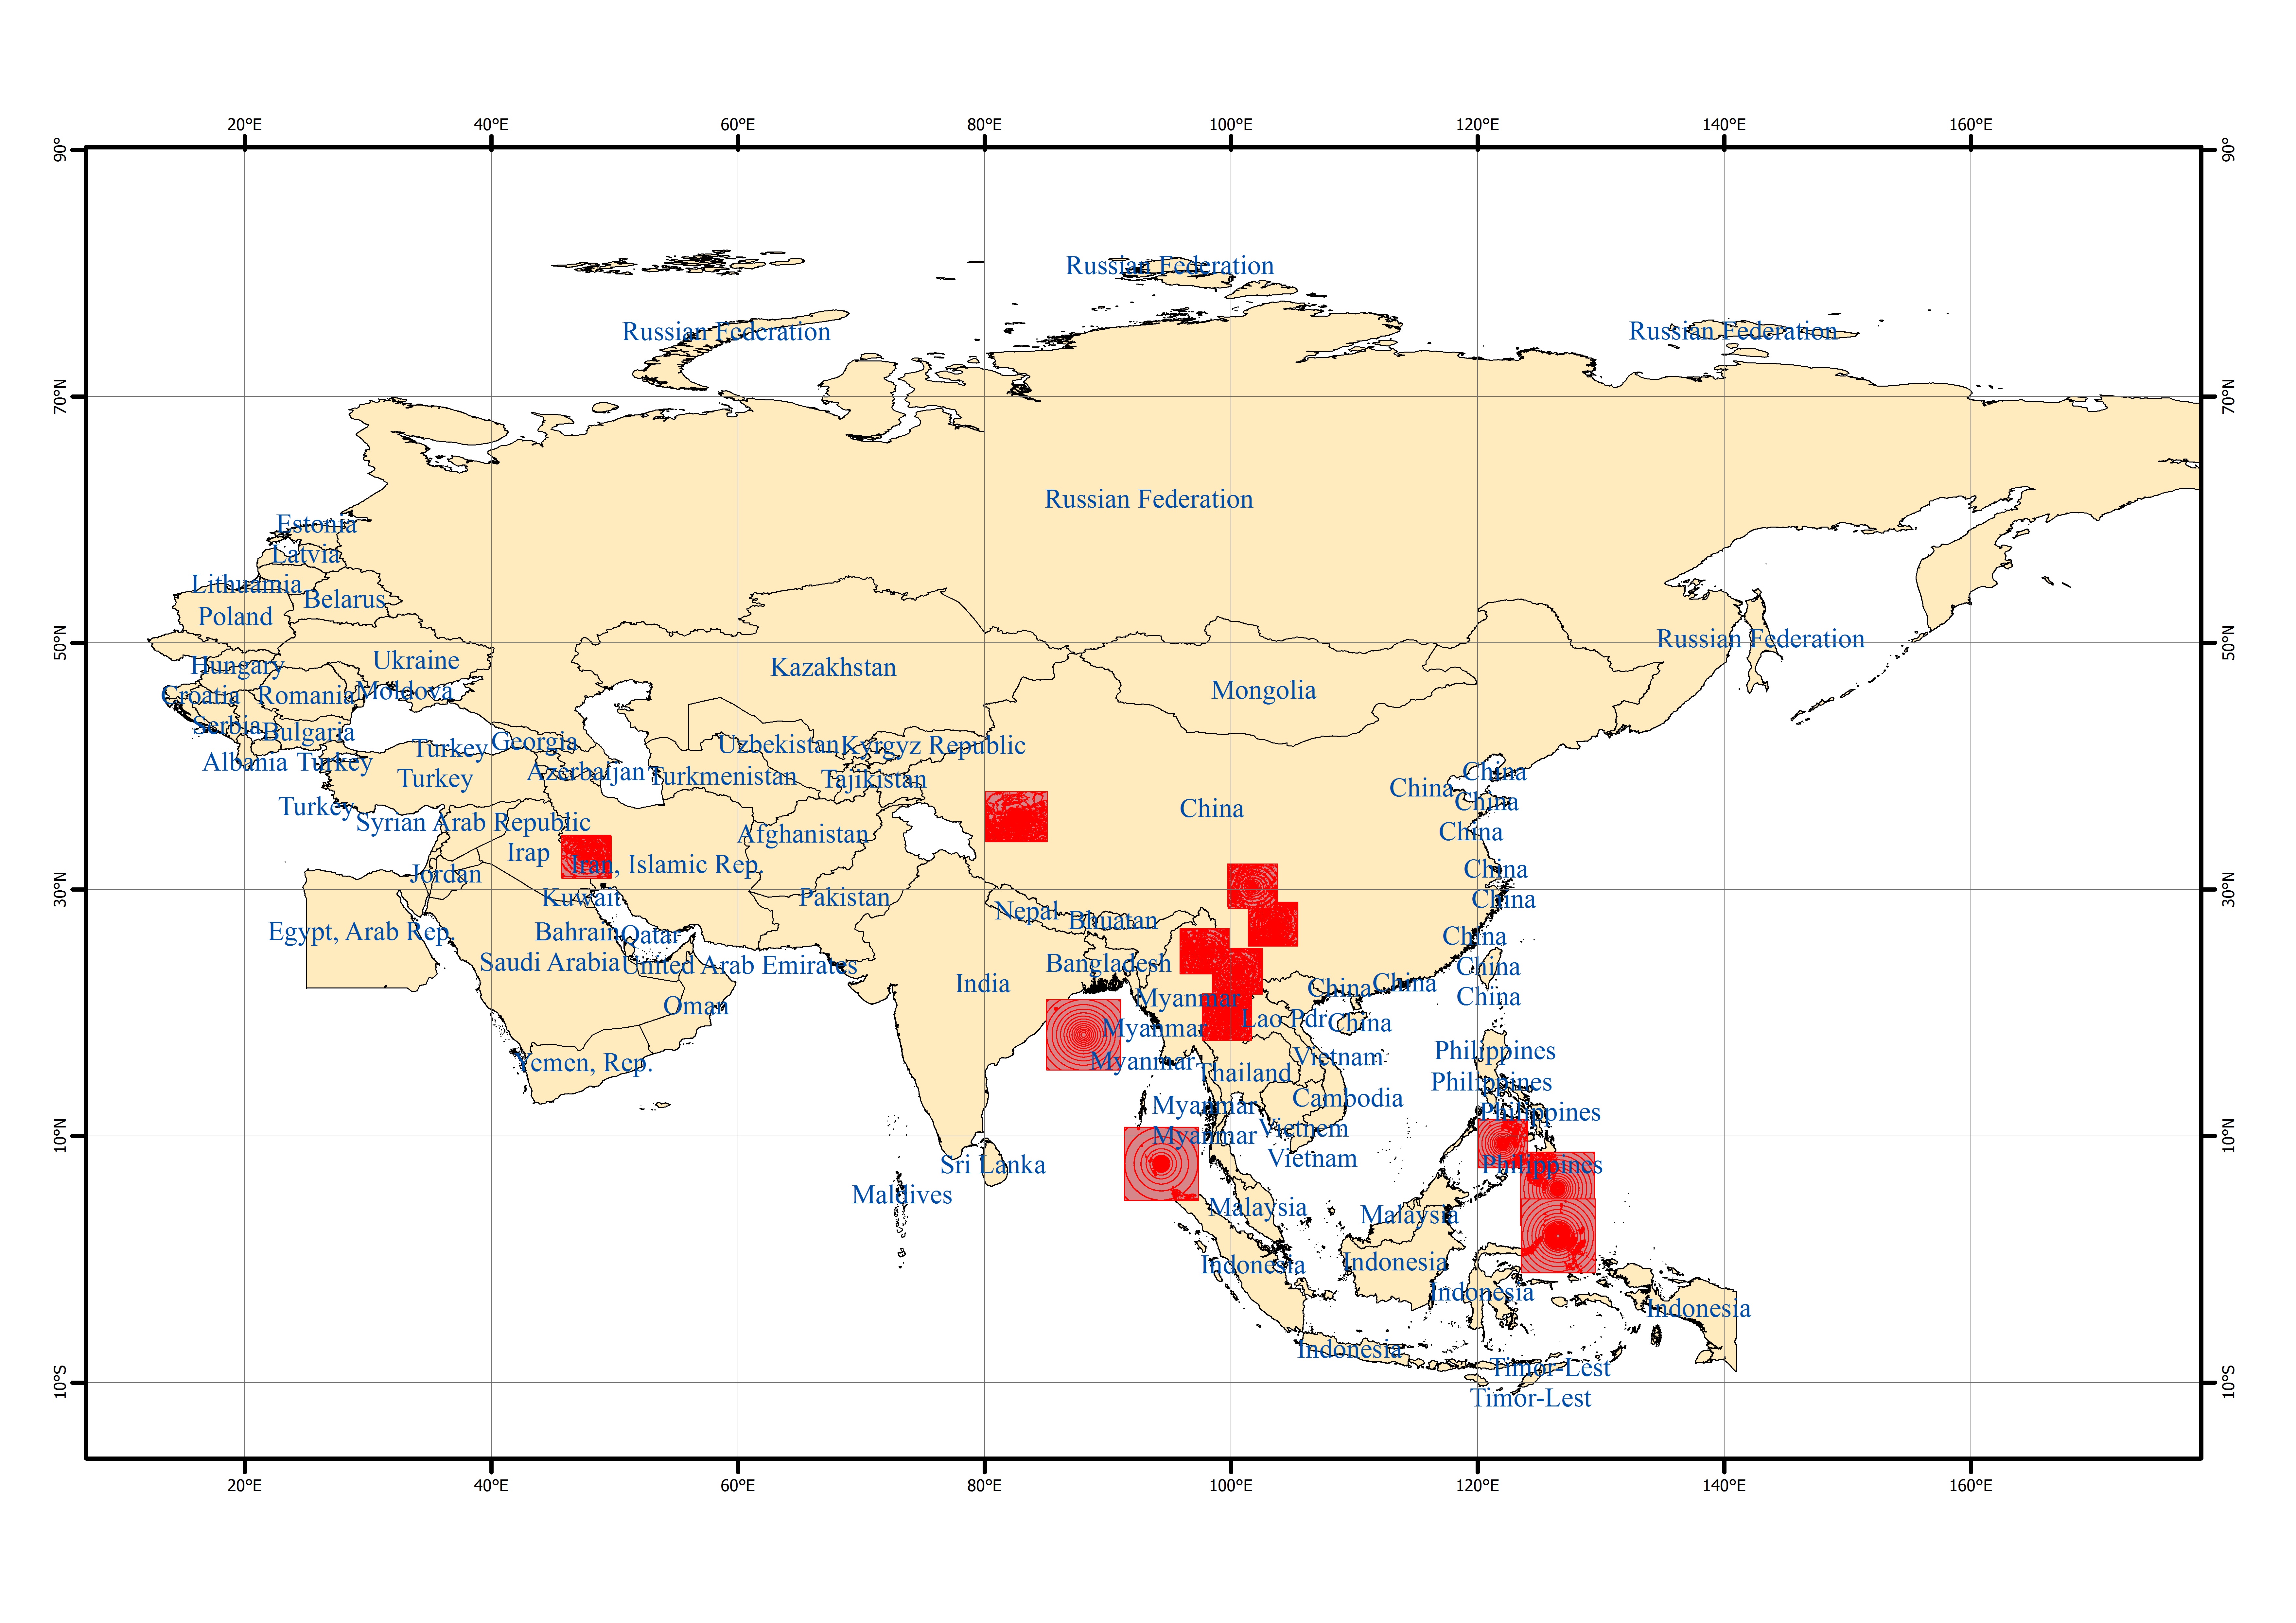 Spatio-temporal Distribution of Earthquake Disaster in the Belt and Road Area of 2014